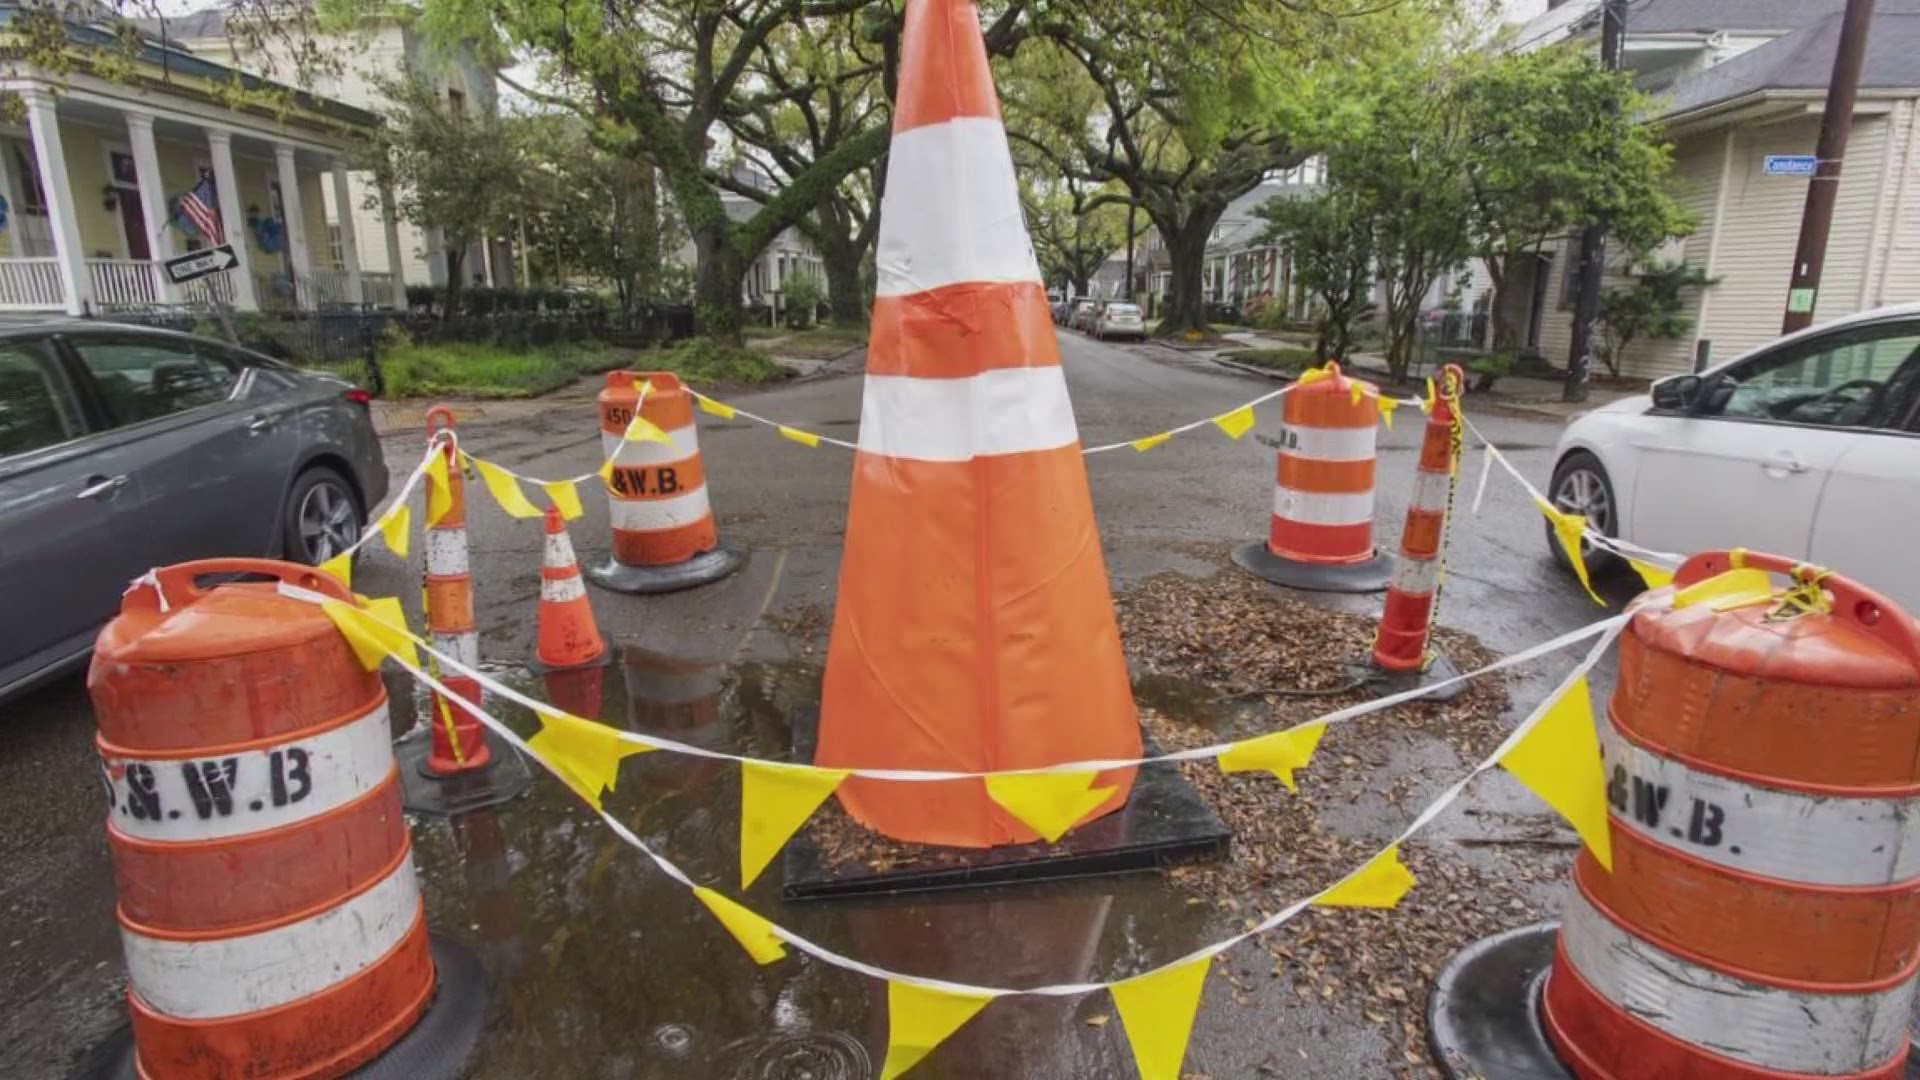 "I’d heard about it through social media. Somebody jokingly called it a “king cone.” You know, like King Kong," New Orleans Photographer Chris Granger told Slate.